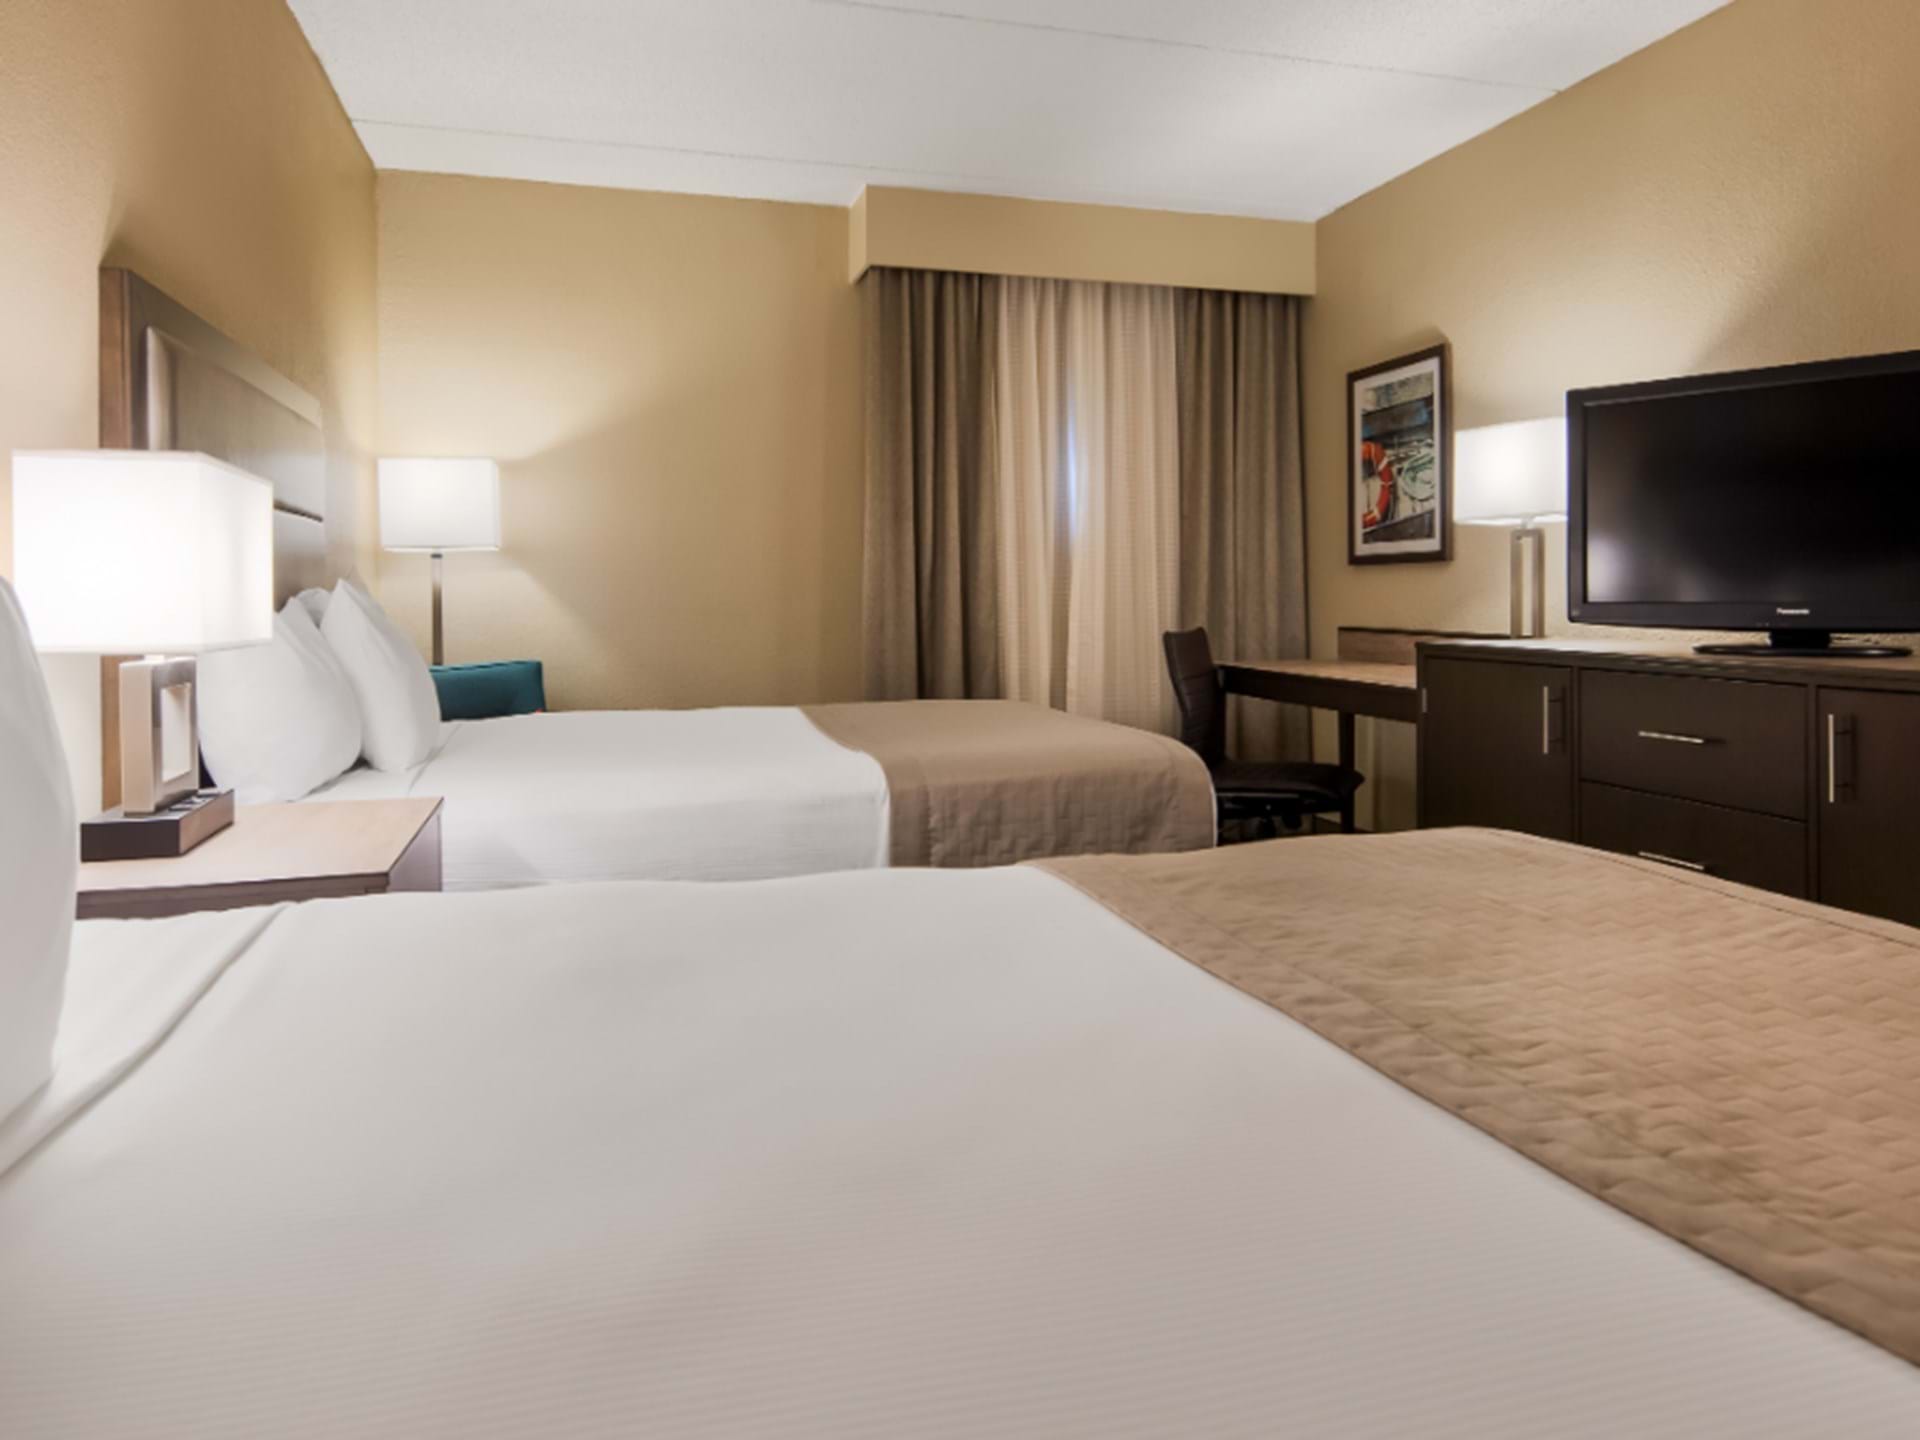 Guest Rooms with free wi-fi